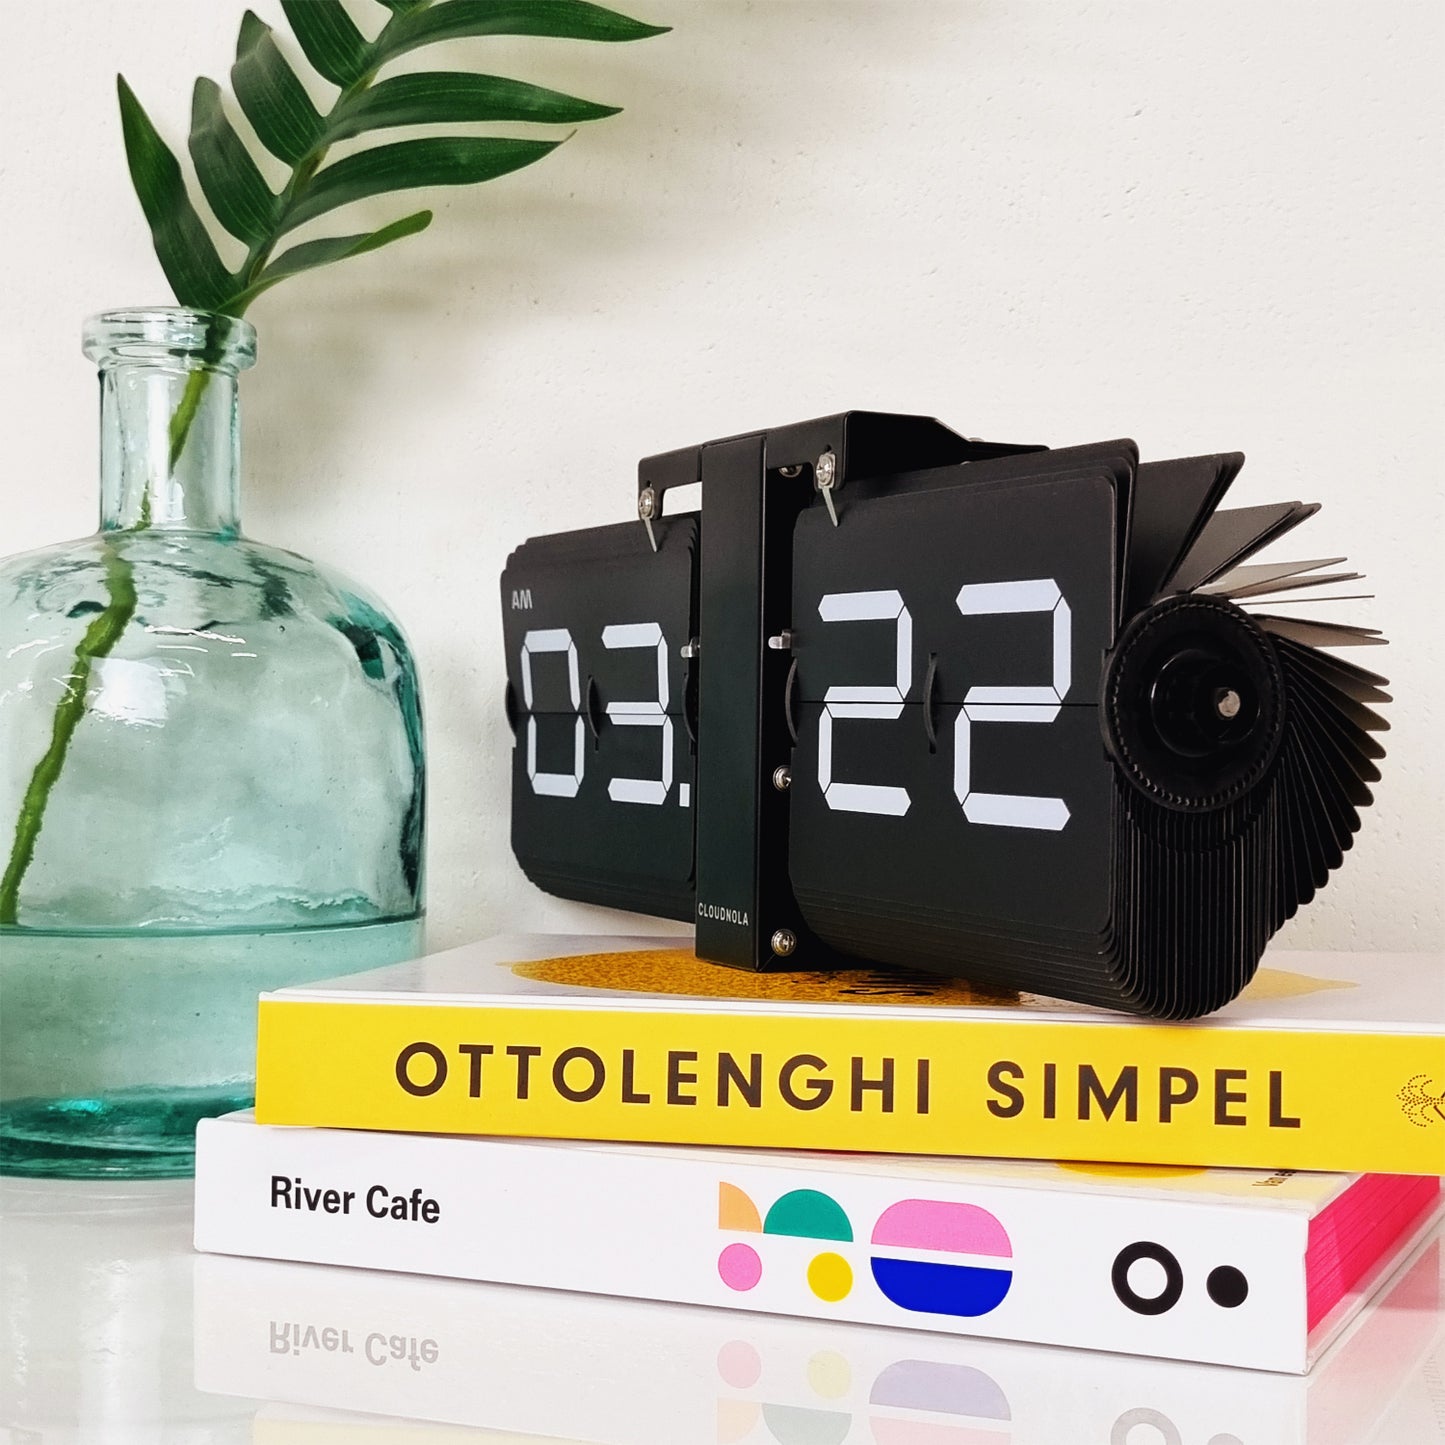 Flipping Out Black on Black - Flip Clock - Flip Flap - Battery Operated - Table - Wall - Digital